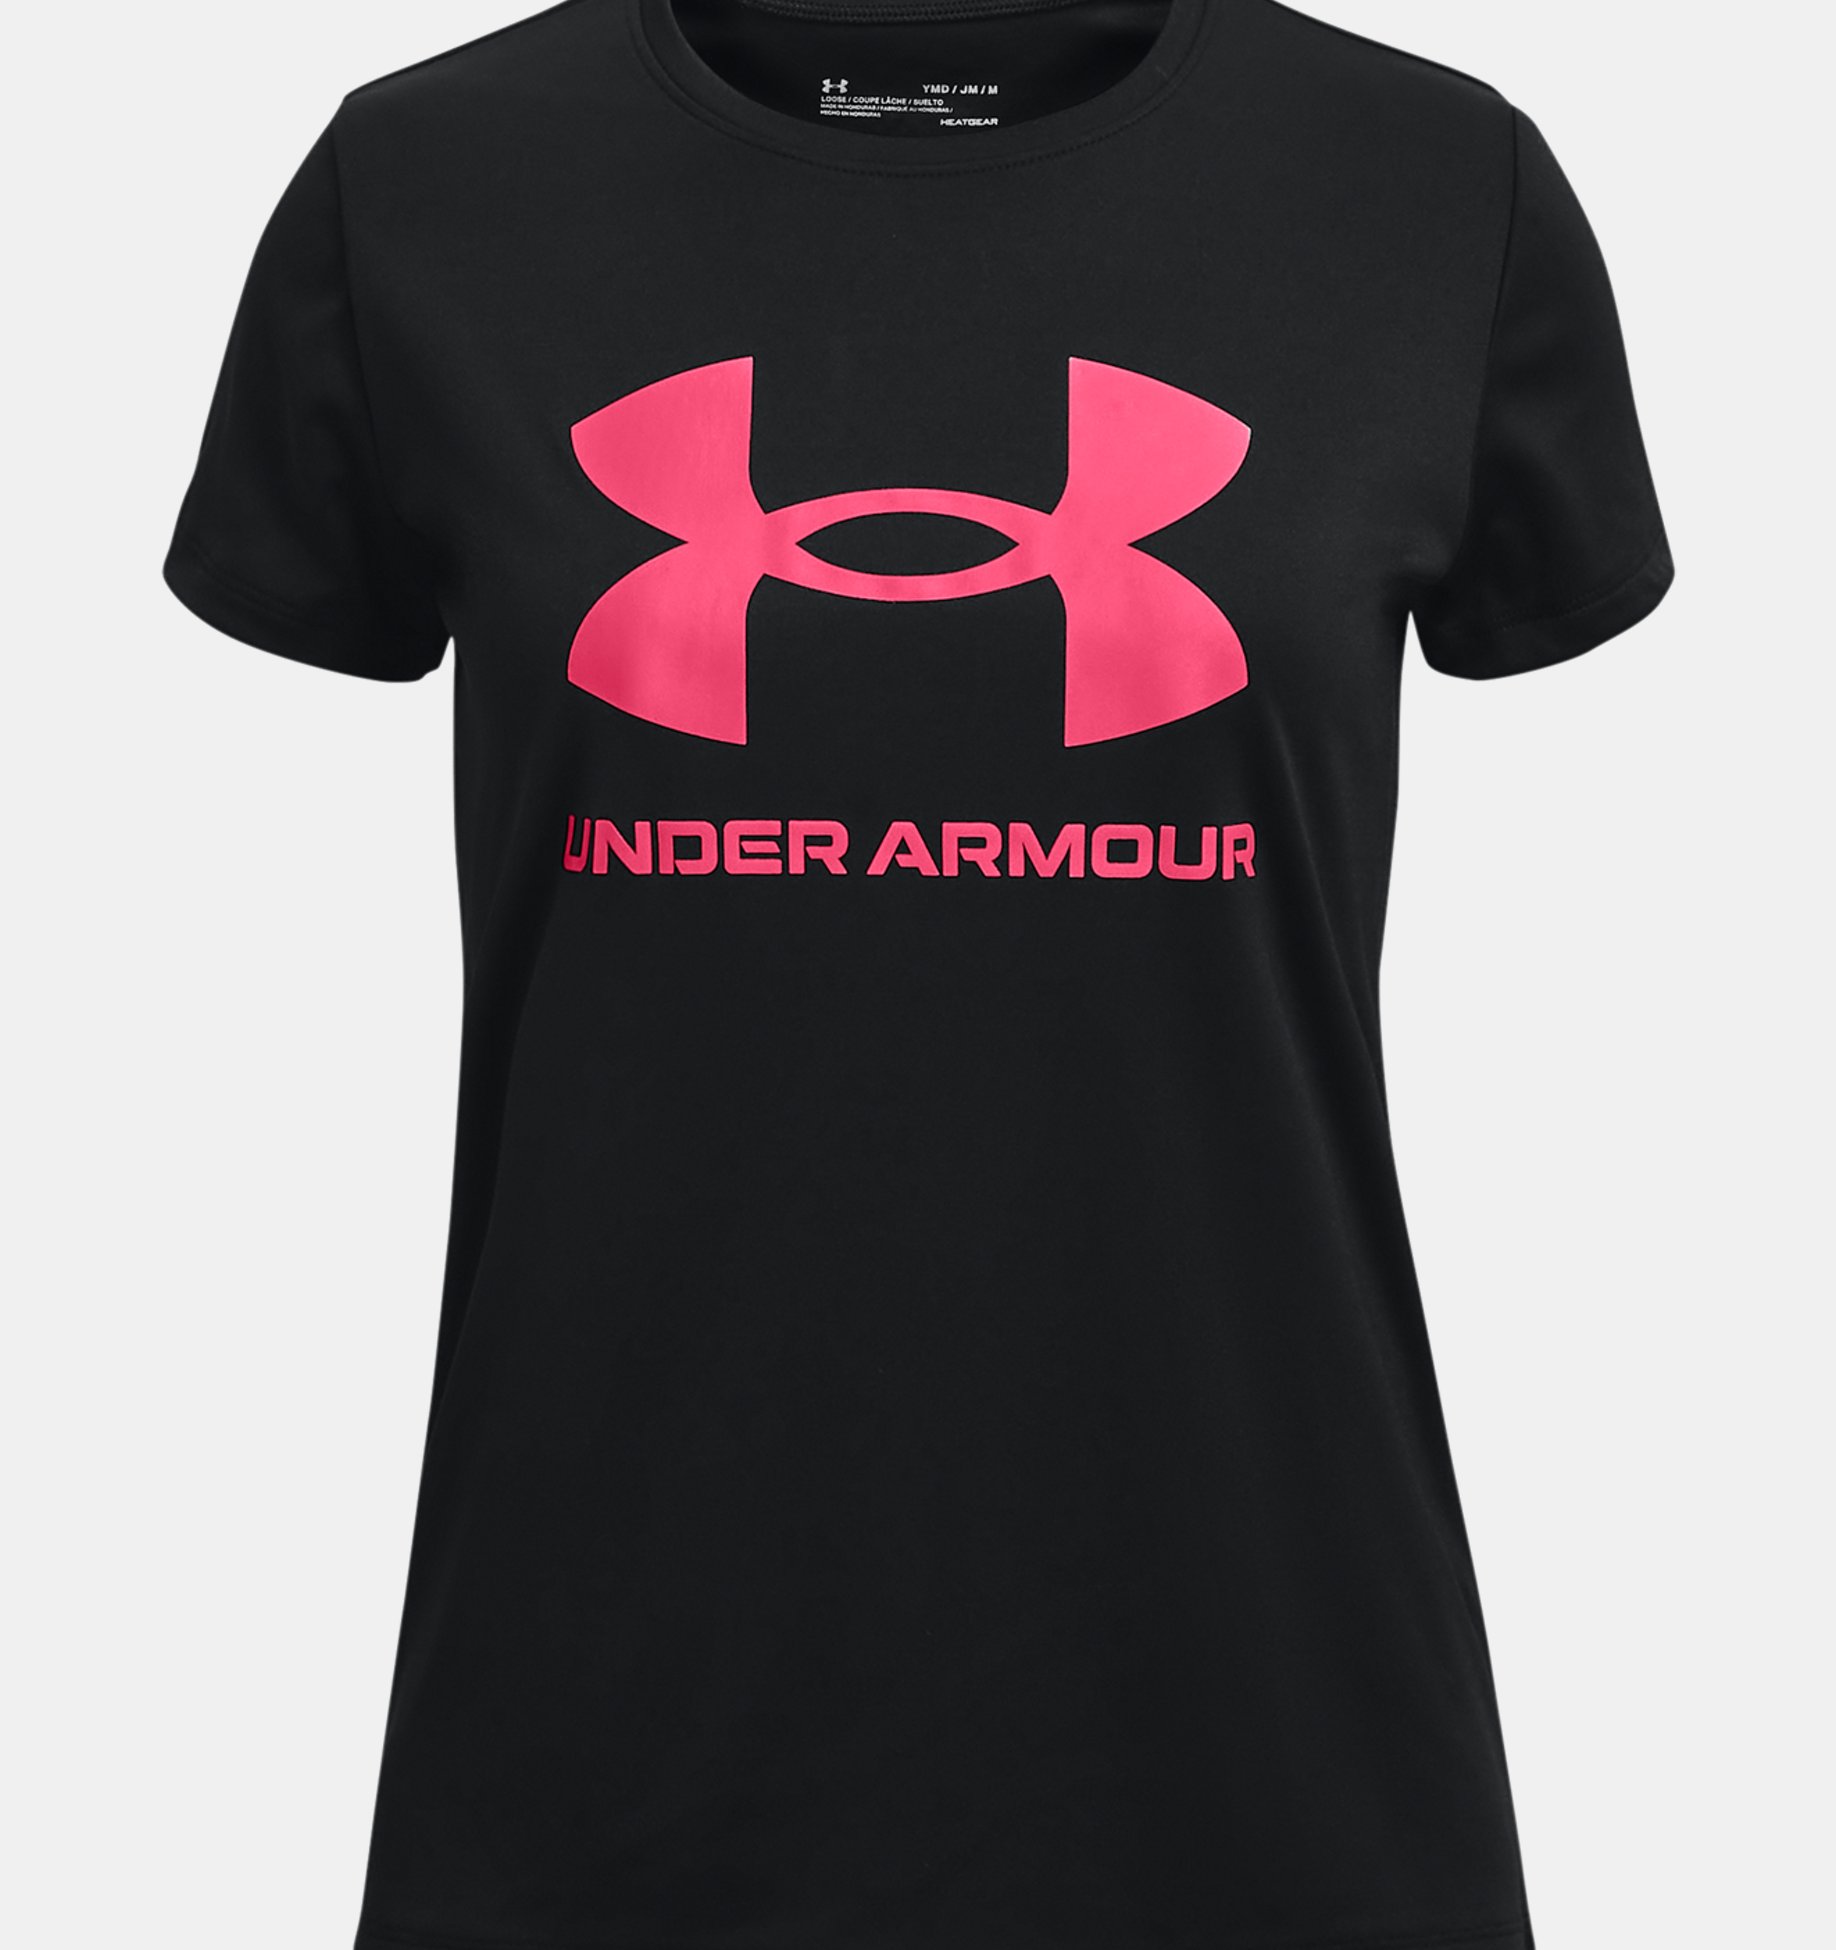 White /Black 100 Youth Small Visiter la boutique Under ArmourUnder Armour Girls' Tech Big Logo Short Sleeve T-Shirt 